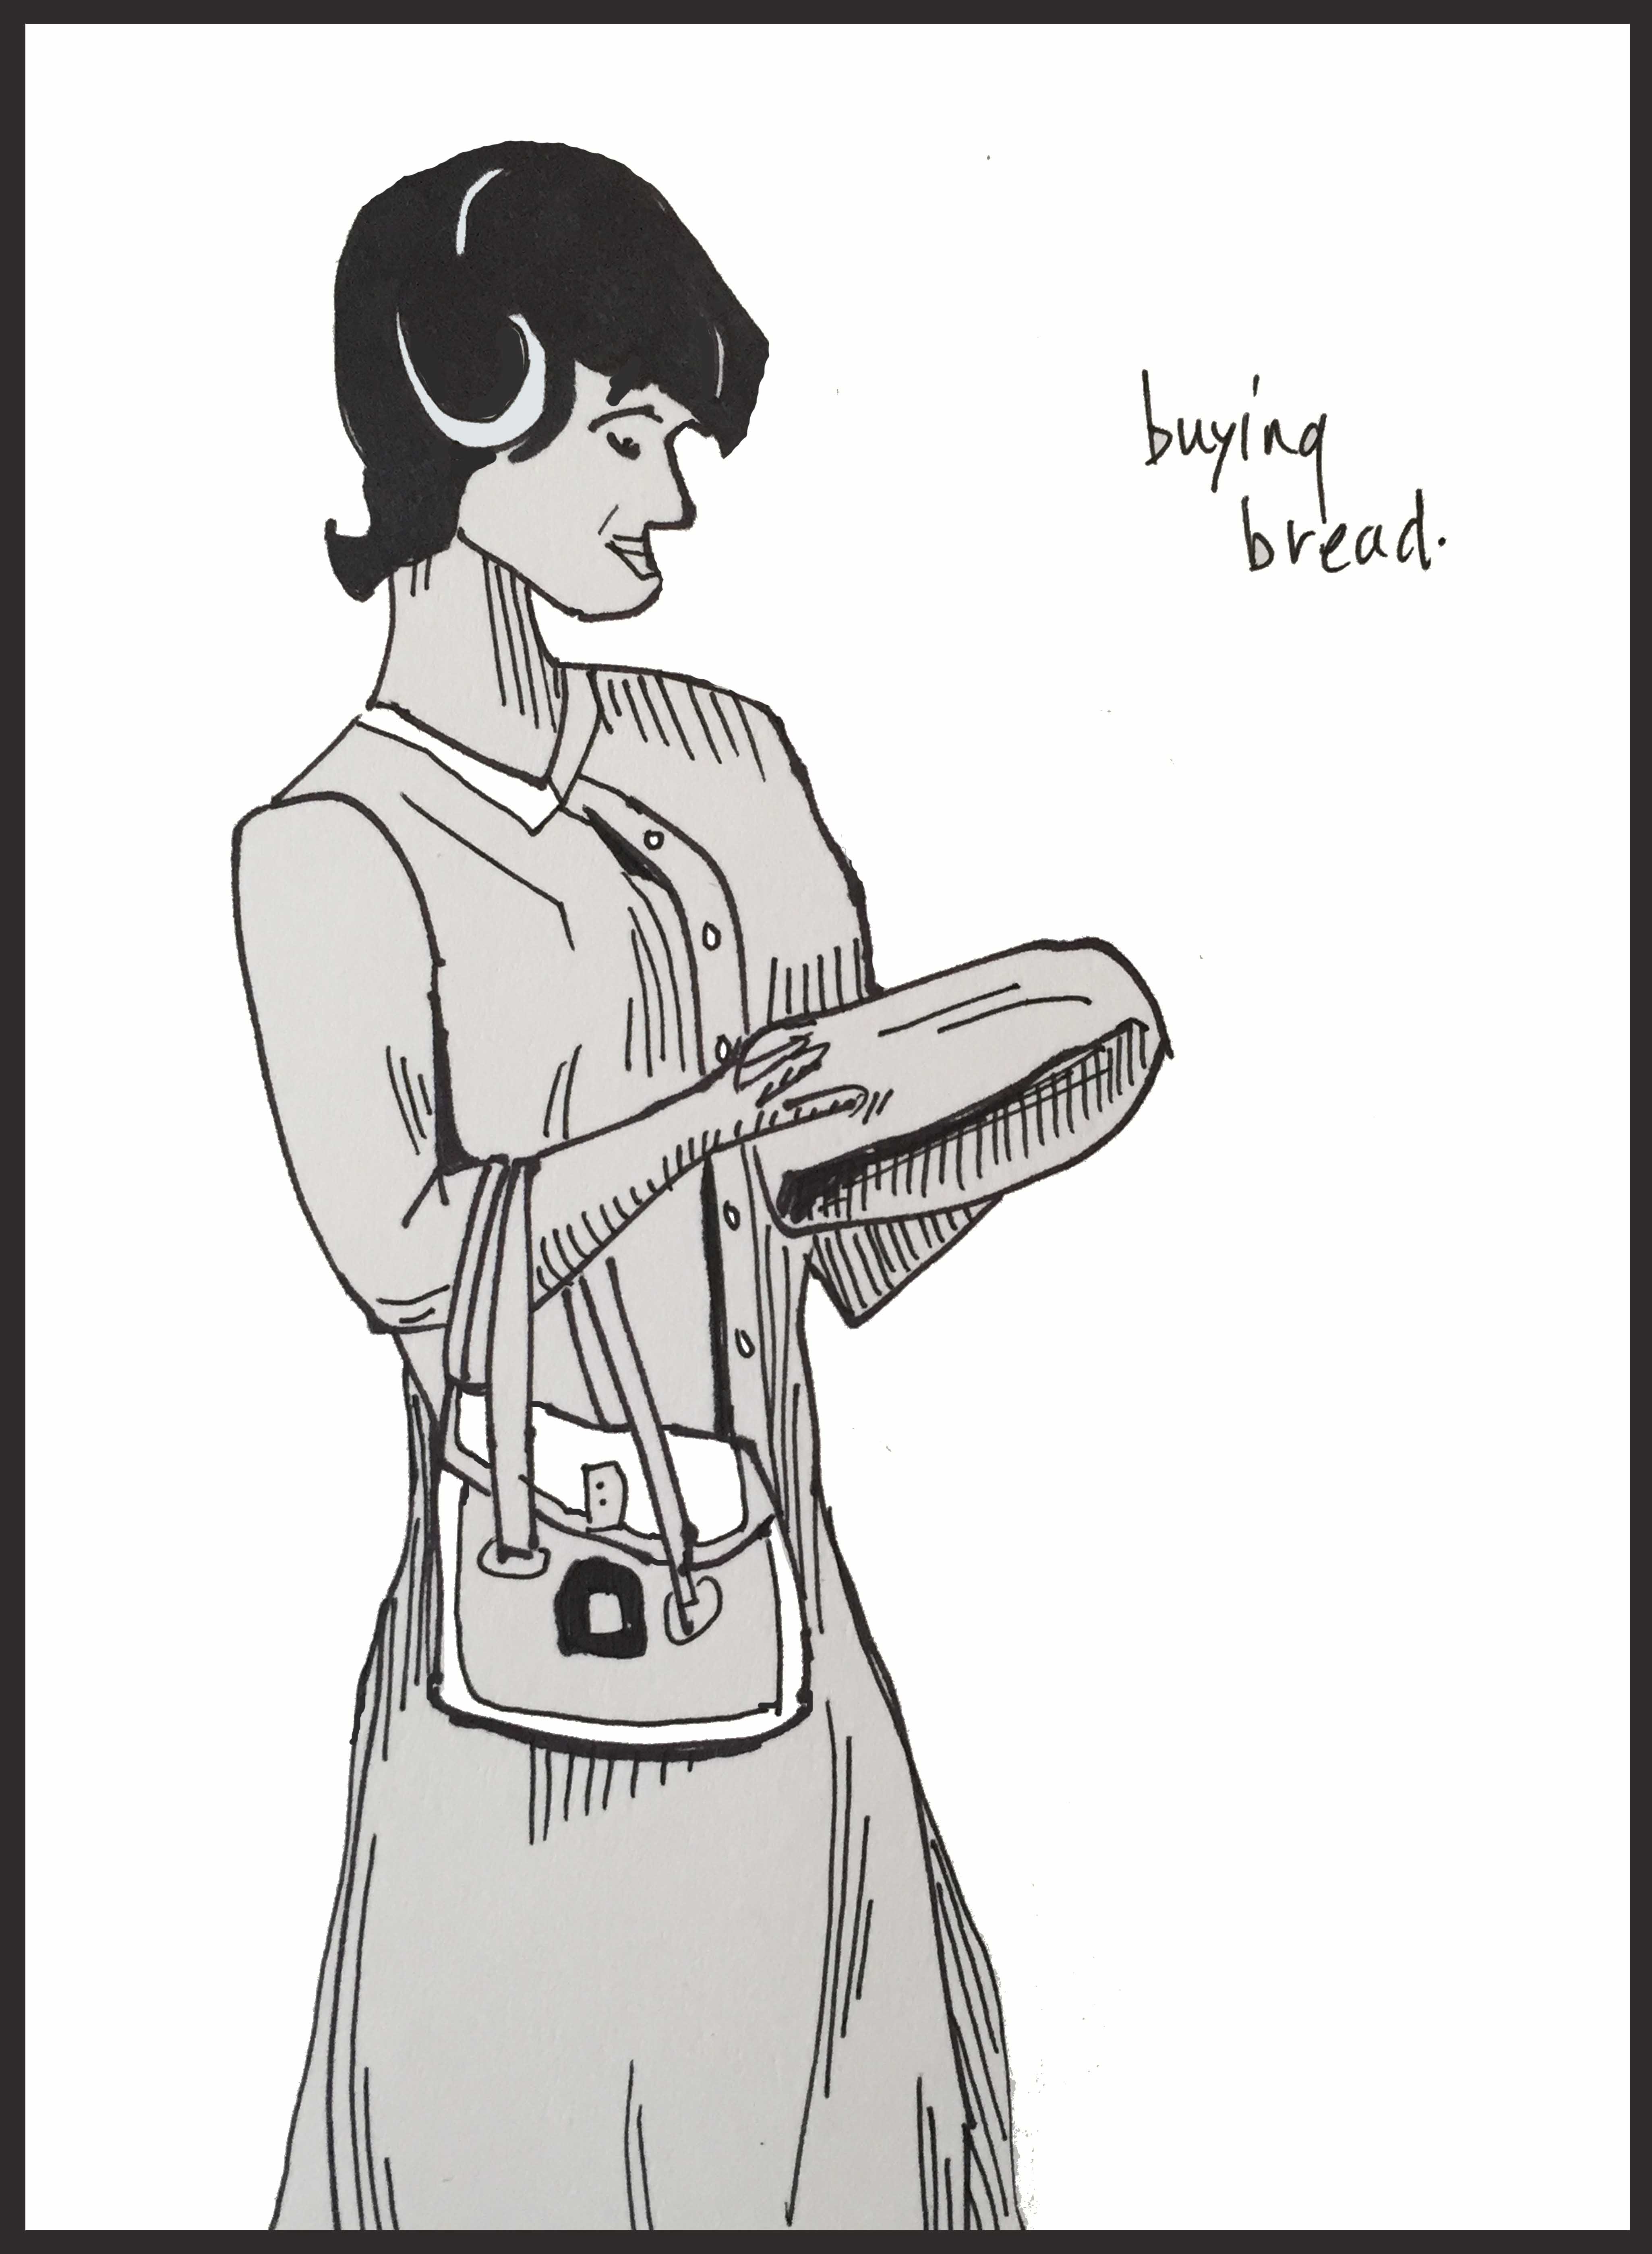 art every day number 19 / drawing / buying bread